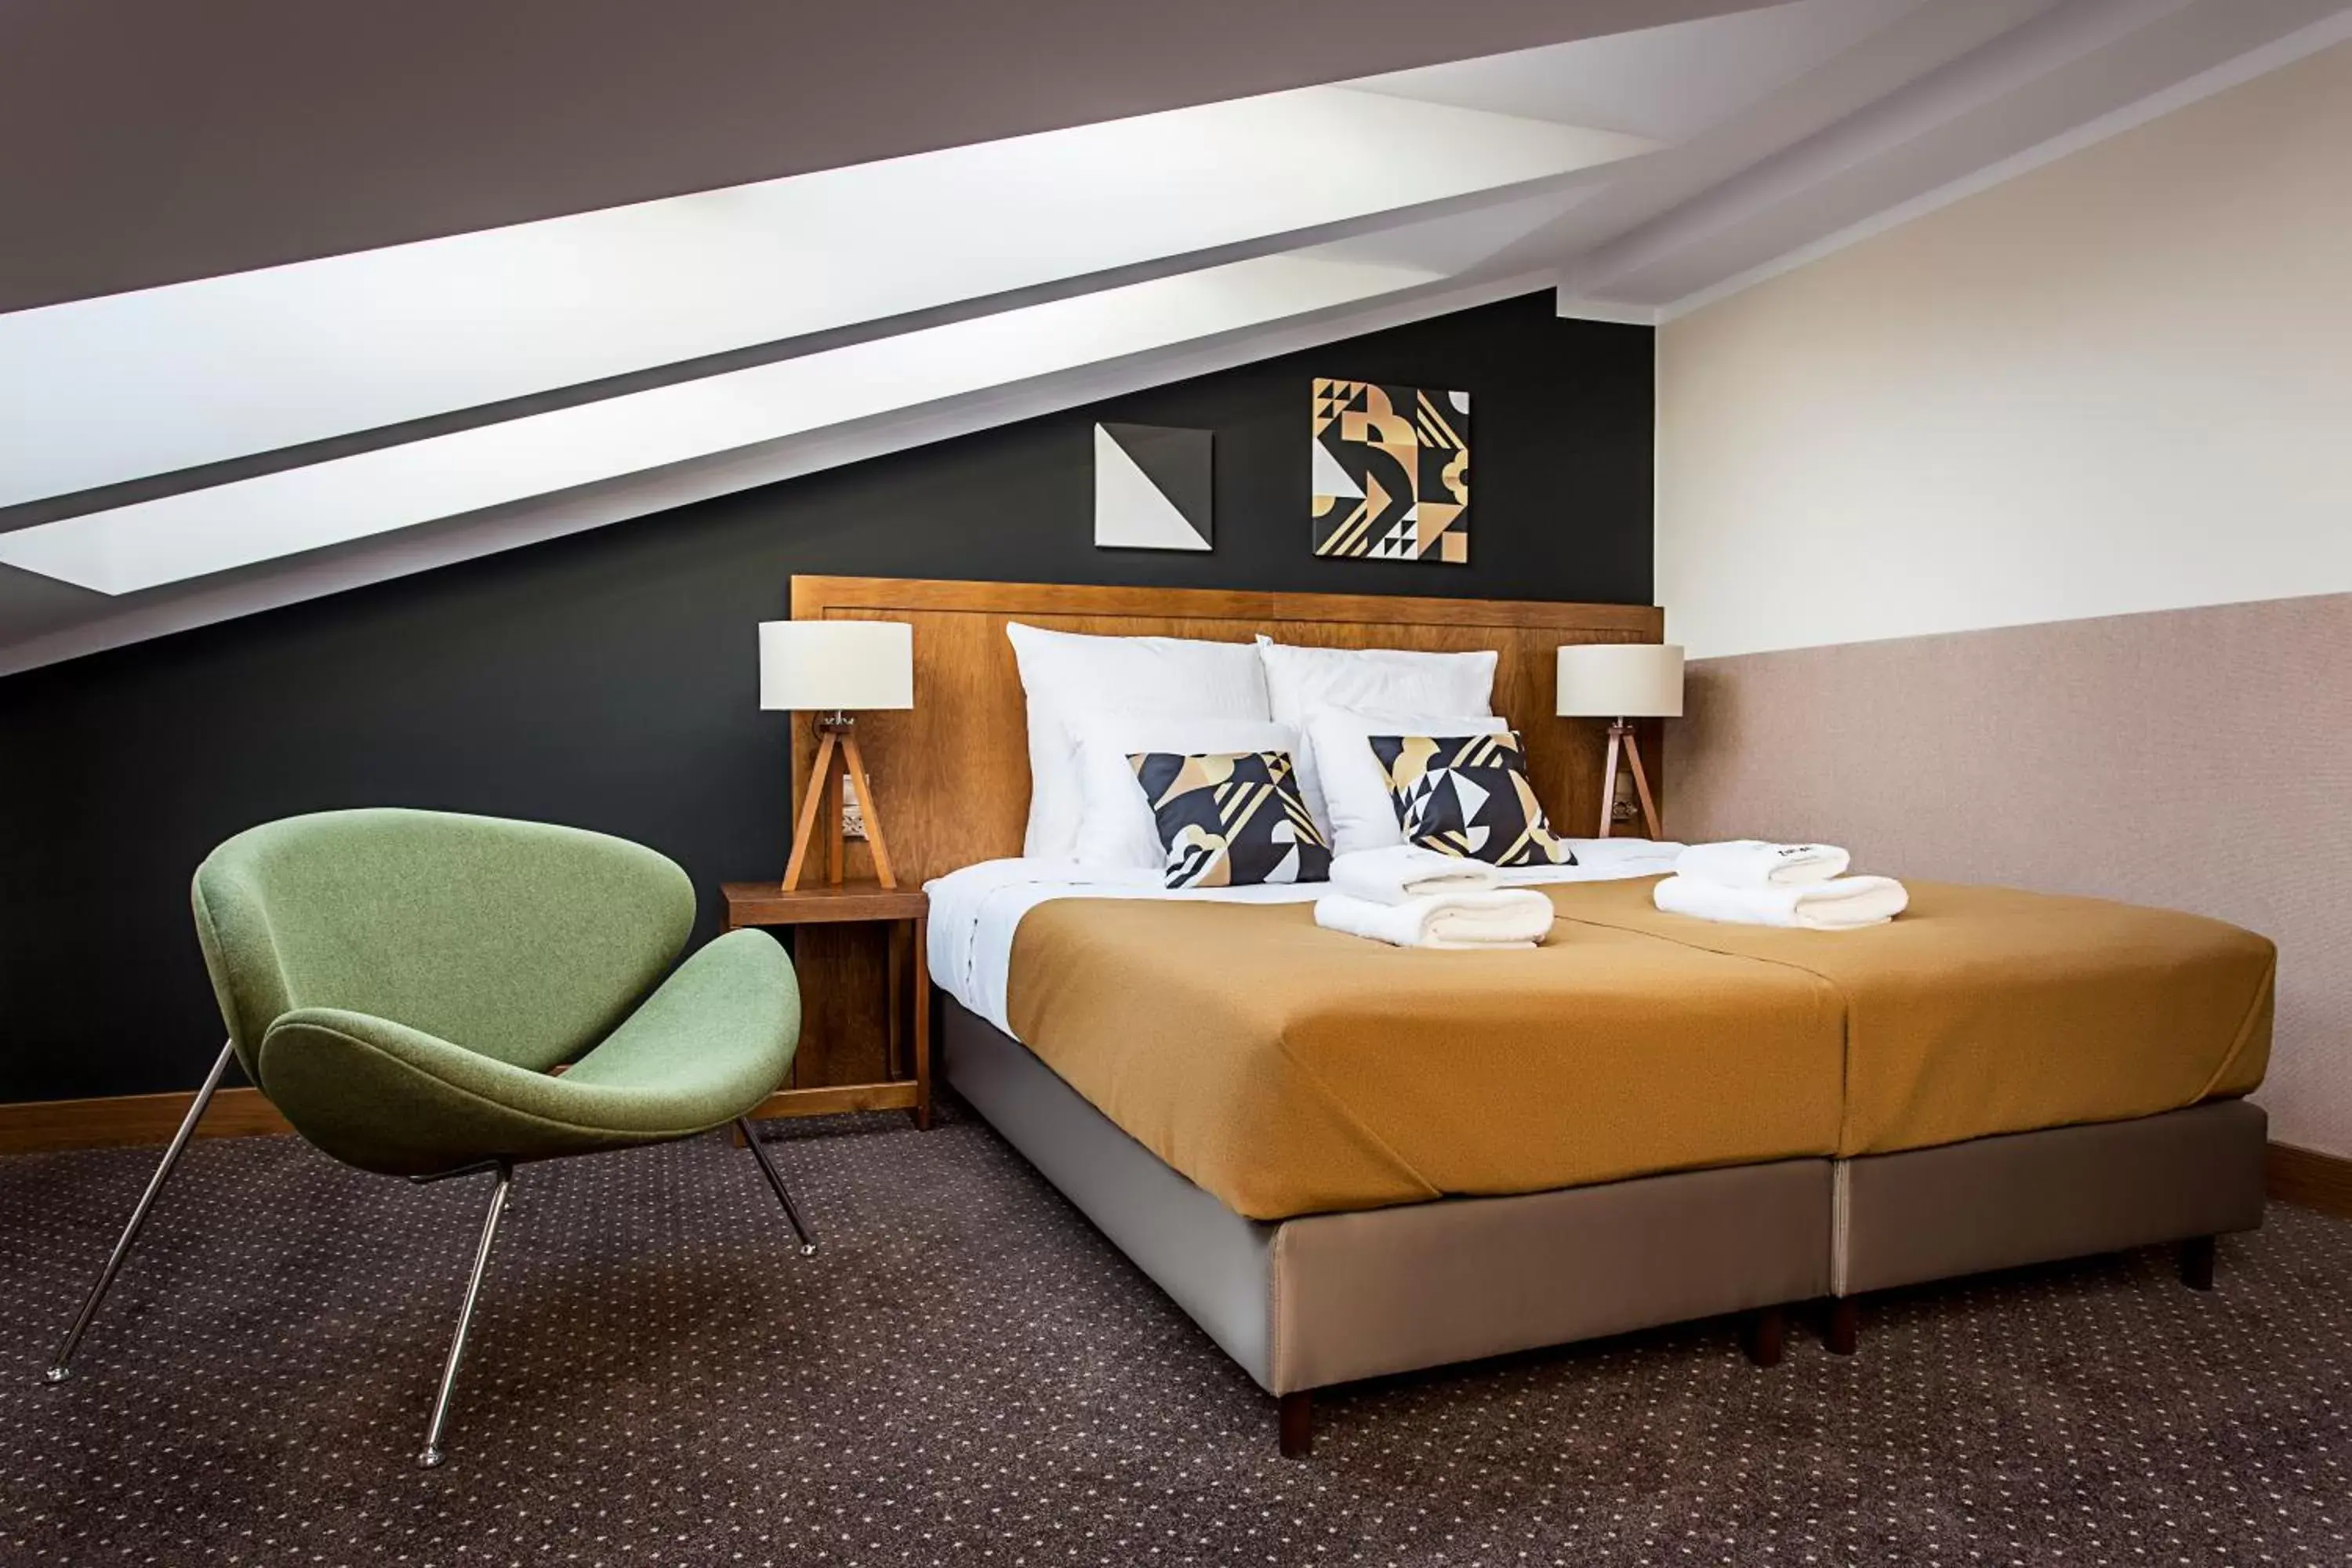 Bed, Room Photo in Zulian Aparthotel by Artery Hotels